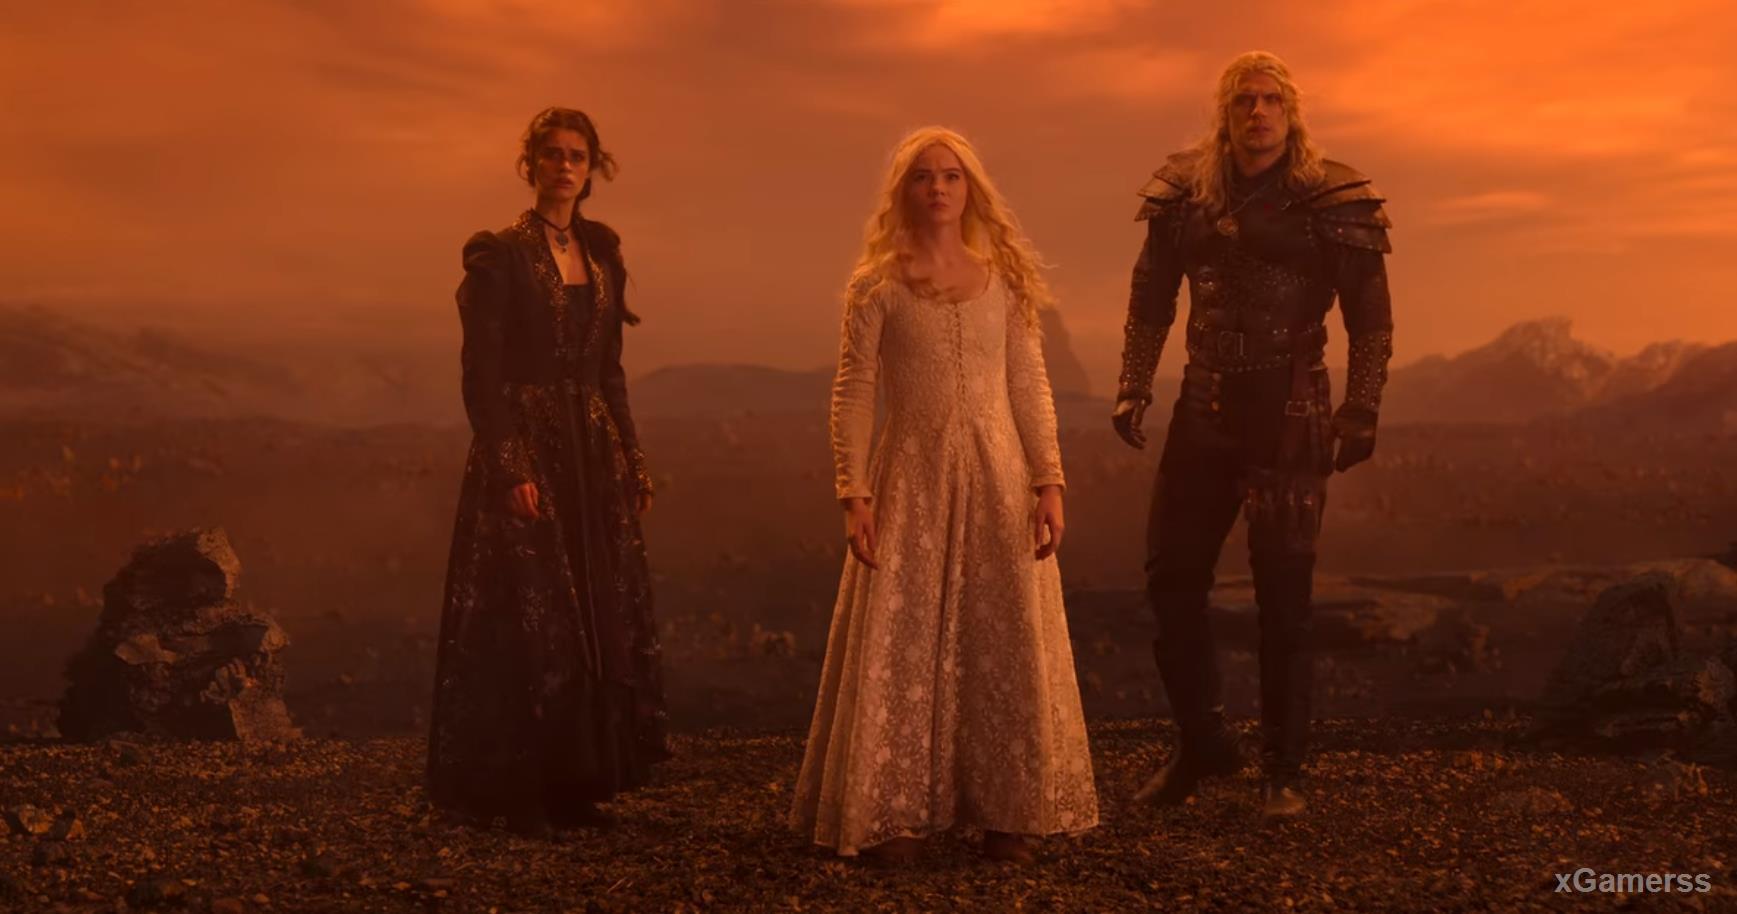 Review of the second season of the Witcher series from Netflix